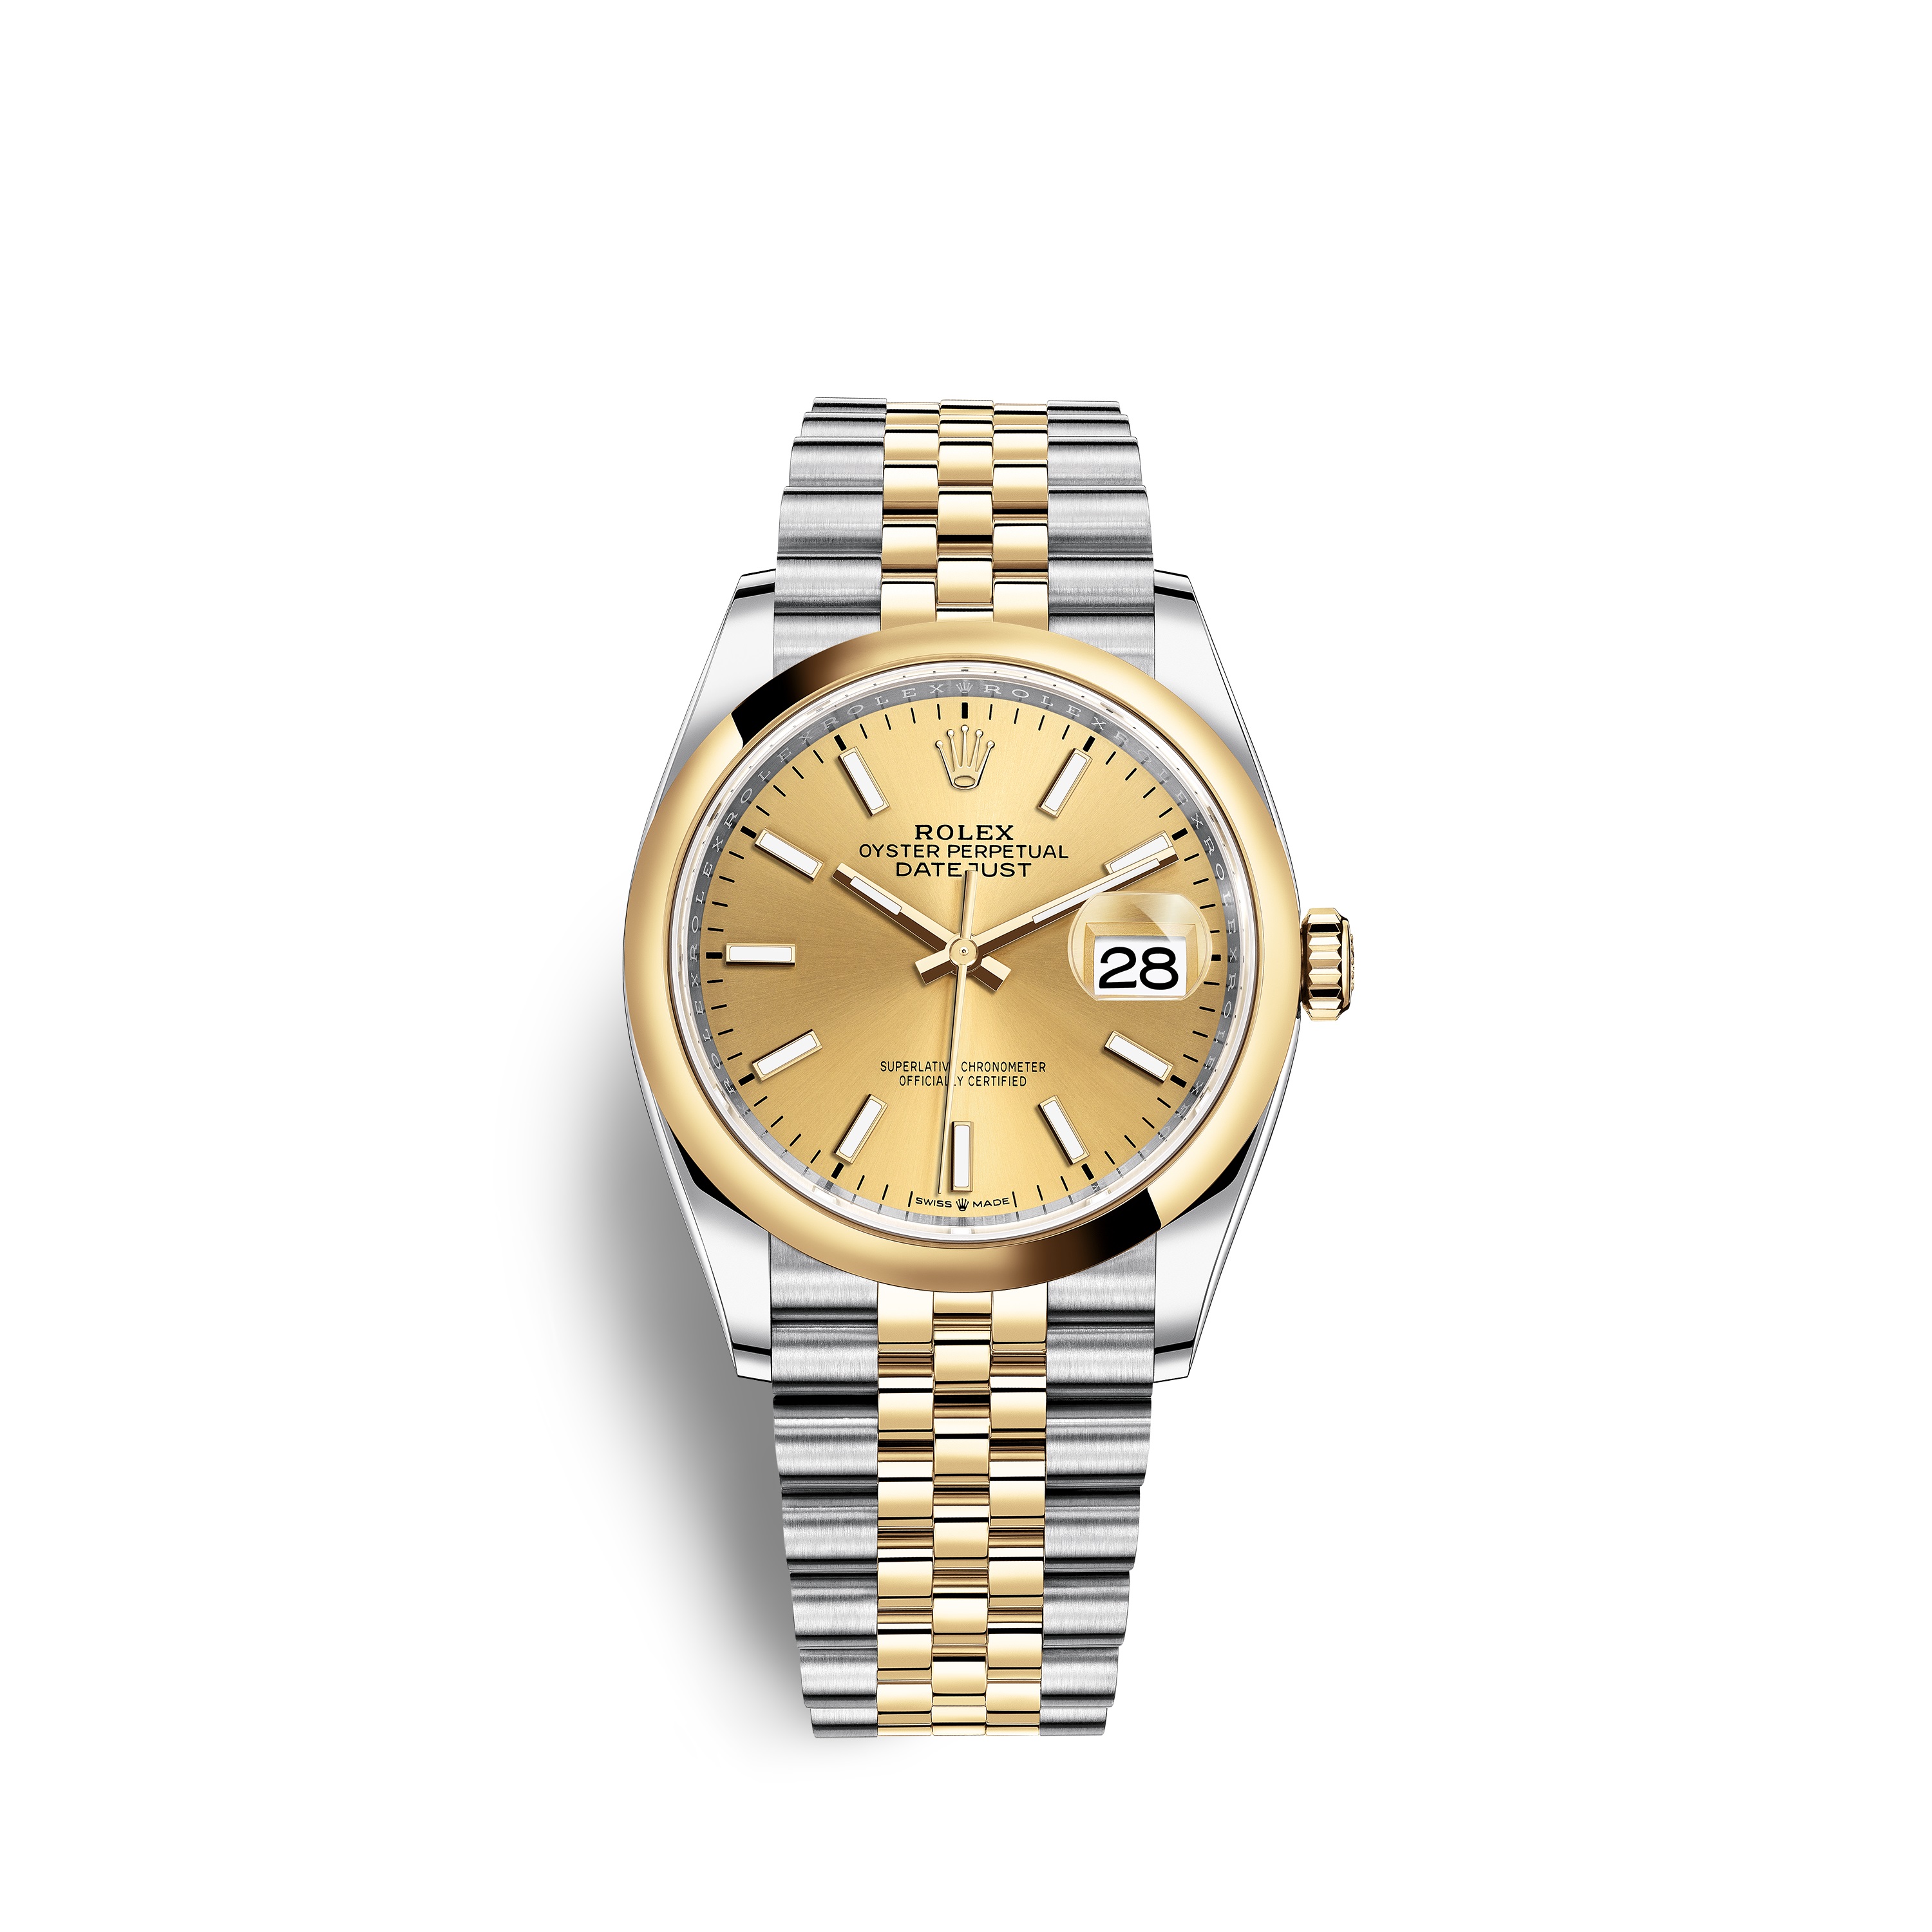 Datejust 36 126203 Gold & Stainless Steel Watch (Champagne)